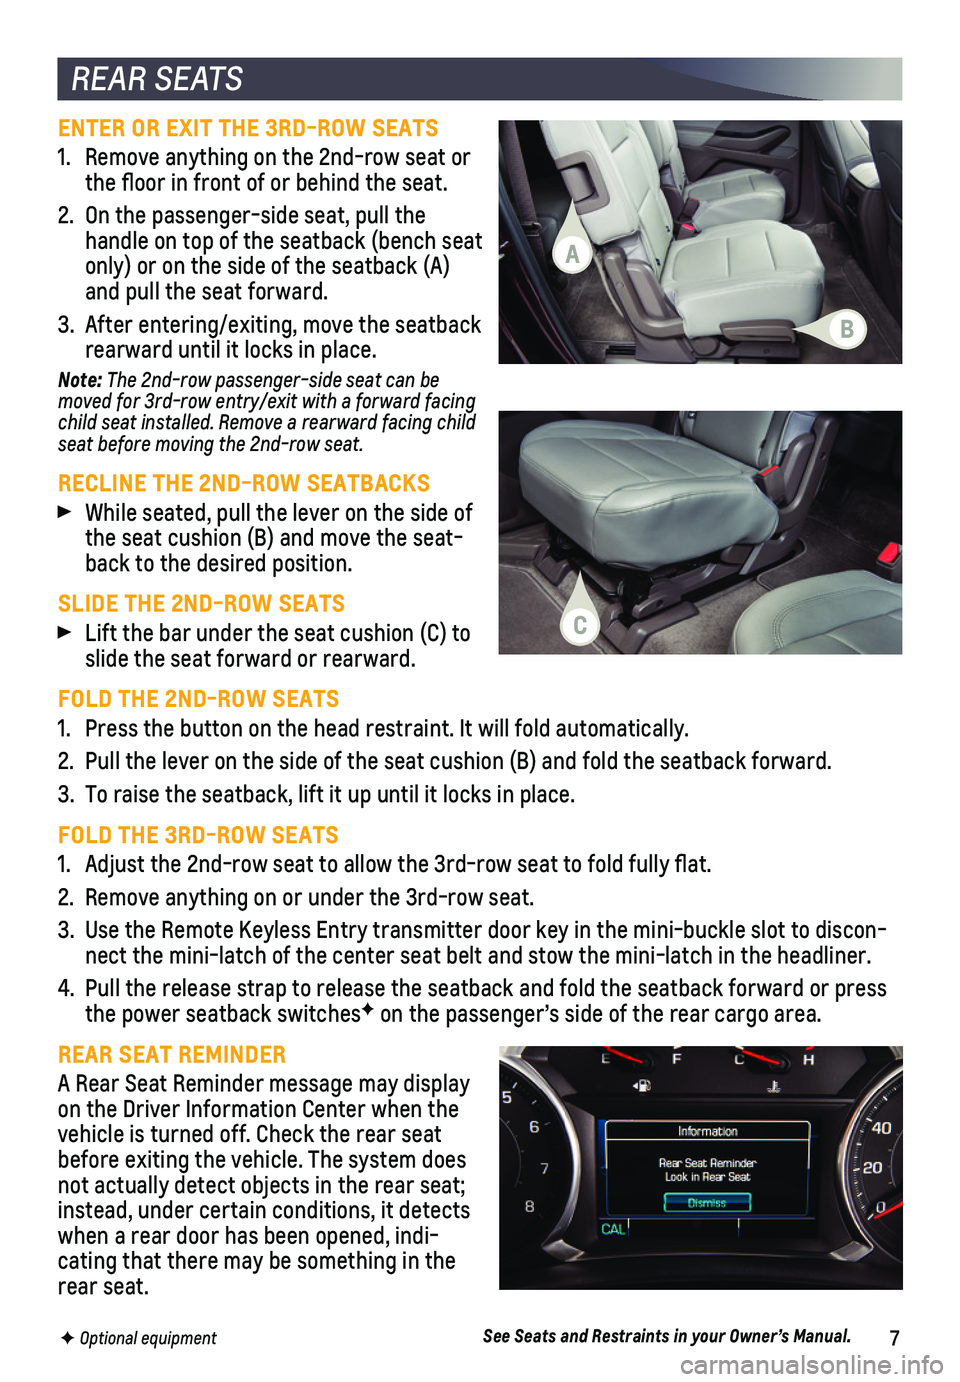 CHEVROLET TRAX 2019  Owners Manual 7F Optional equipment  
REAR SEATS
ENTER OR EXIT THE 3RD-ROW SEATS
1. Remove anything on the 2nd-row seat or the floor in front of or behind the seat.
2. On the passenger-side seat, pull the handle on